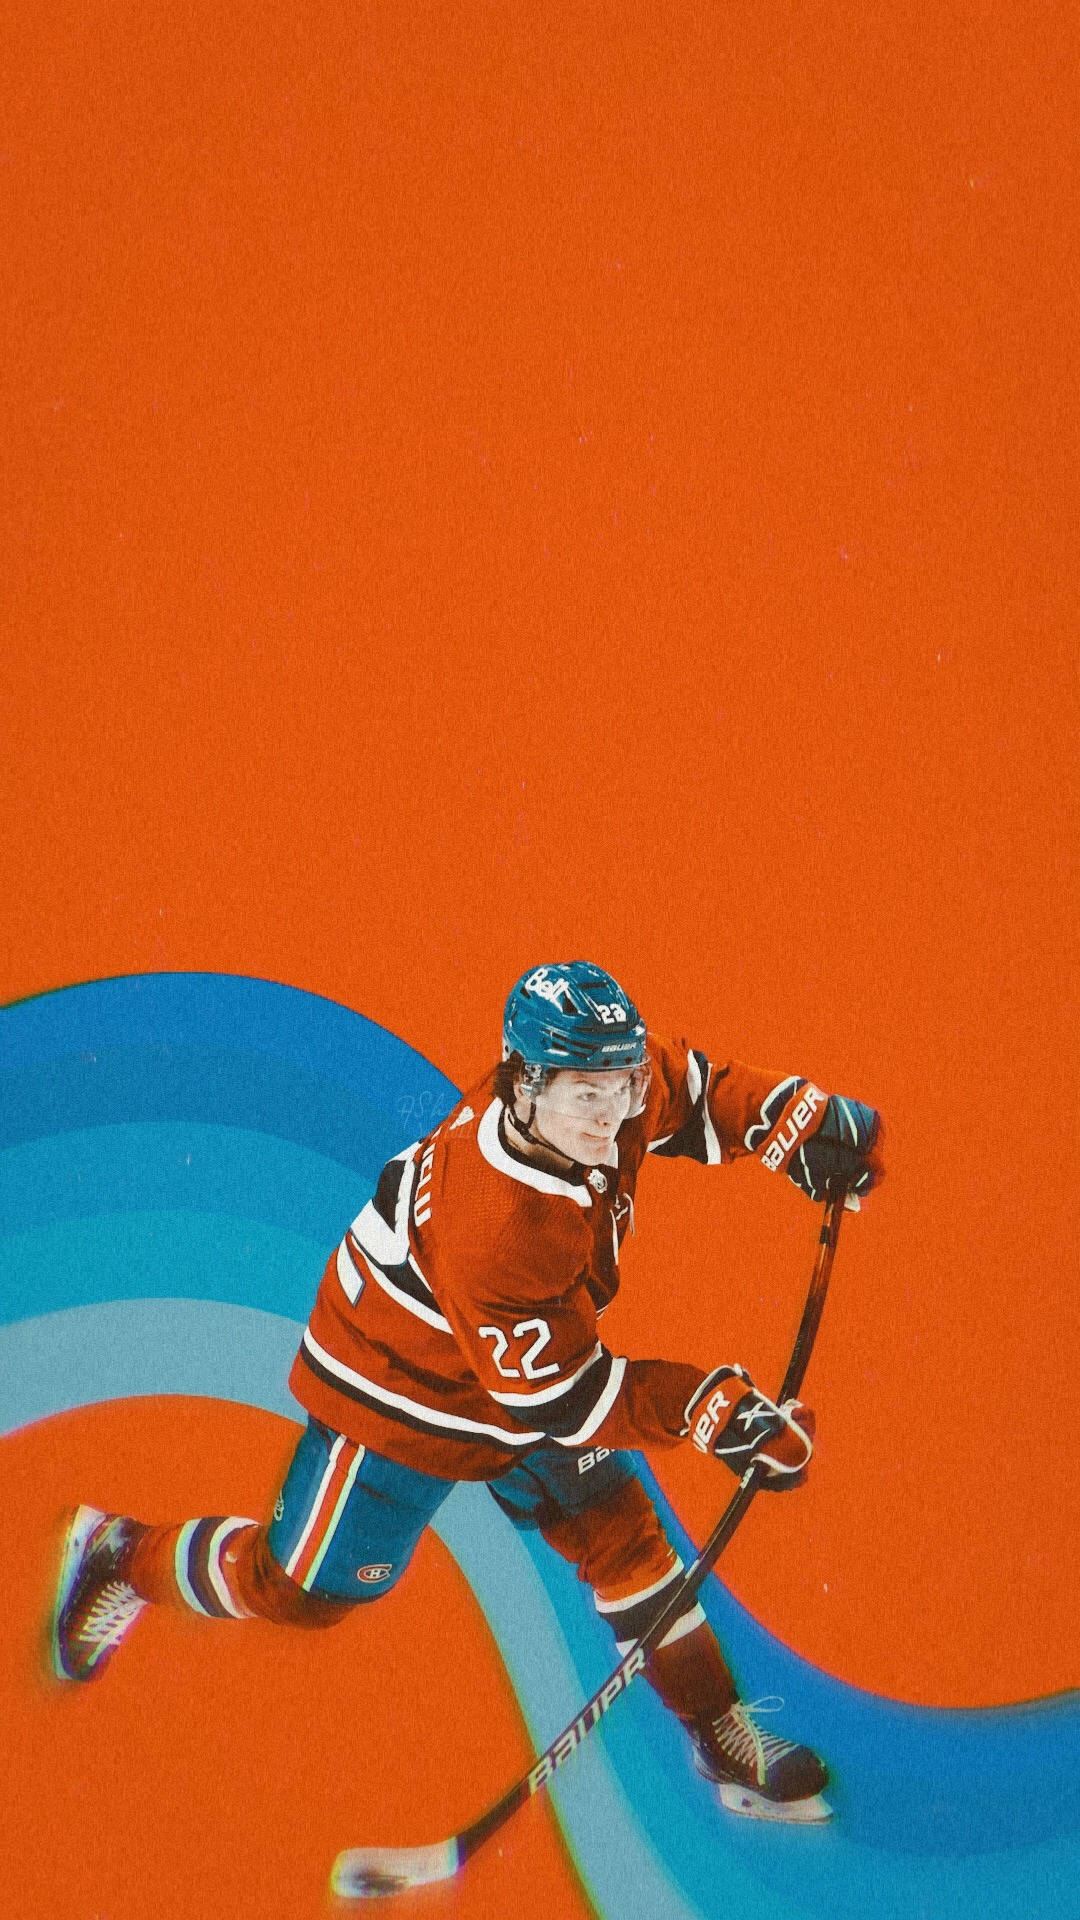 Download Cole Caufield Montreal Canadiens Poster Art Wallpaper